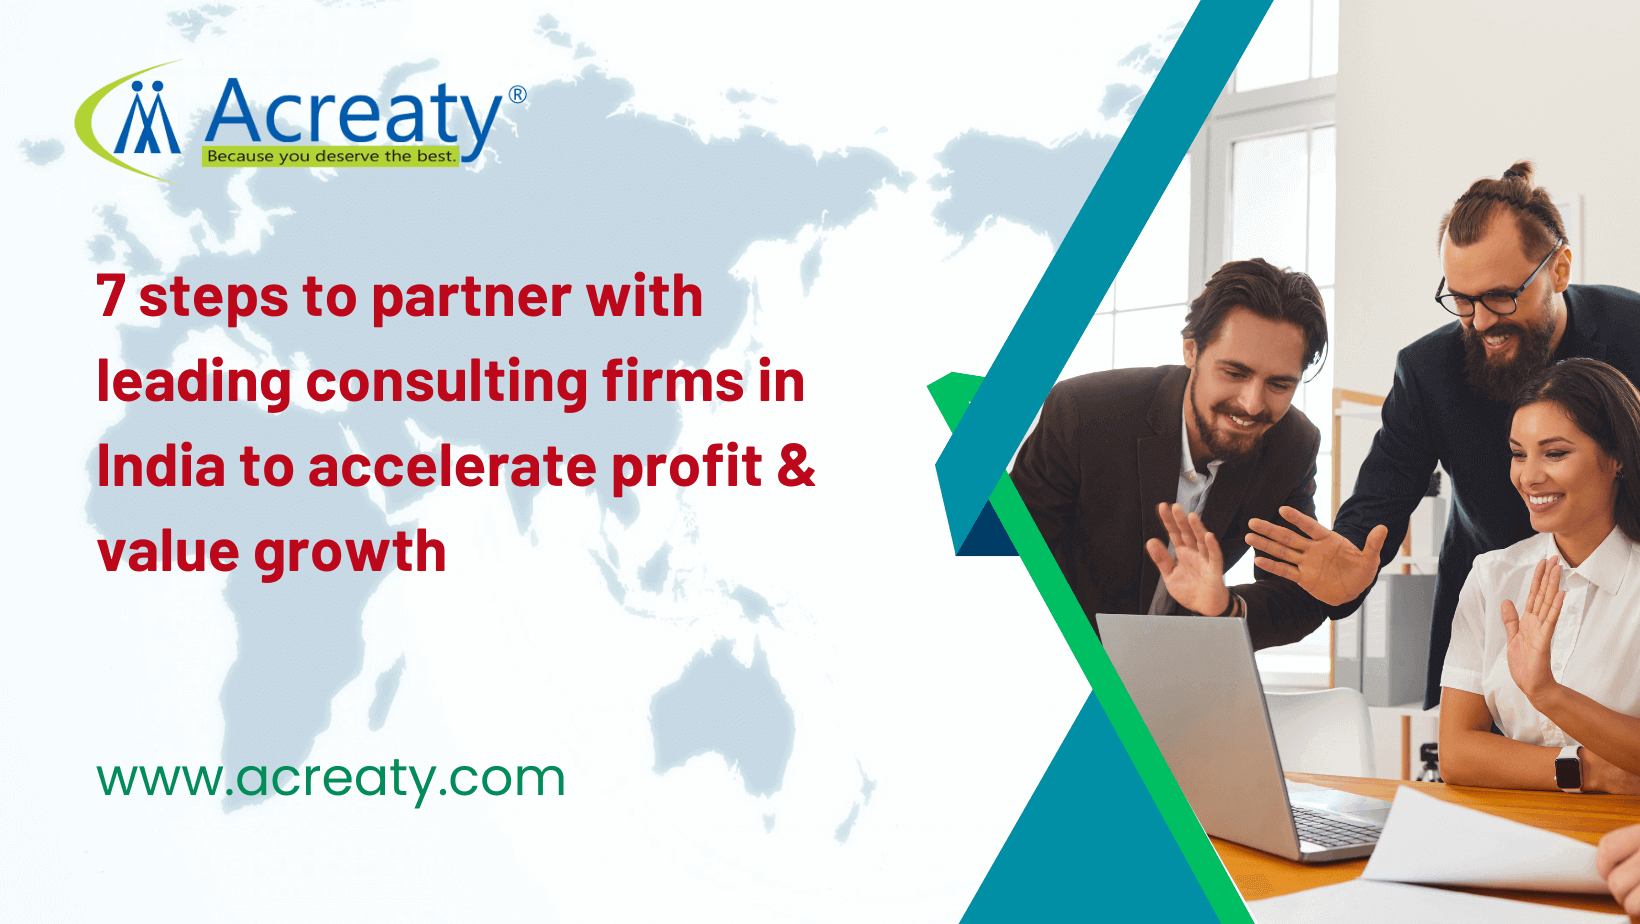 7 steps to partner with leading consulting firms in India to accelerate profit & value growth